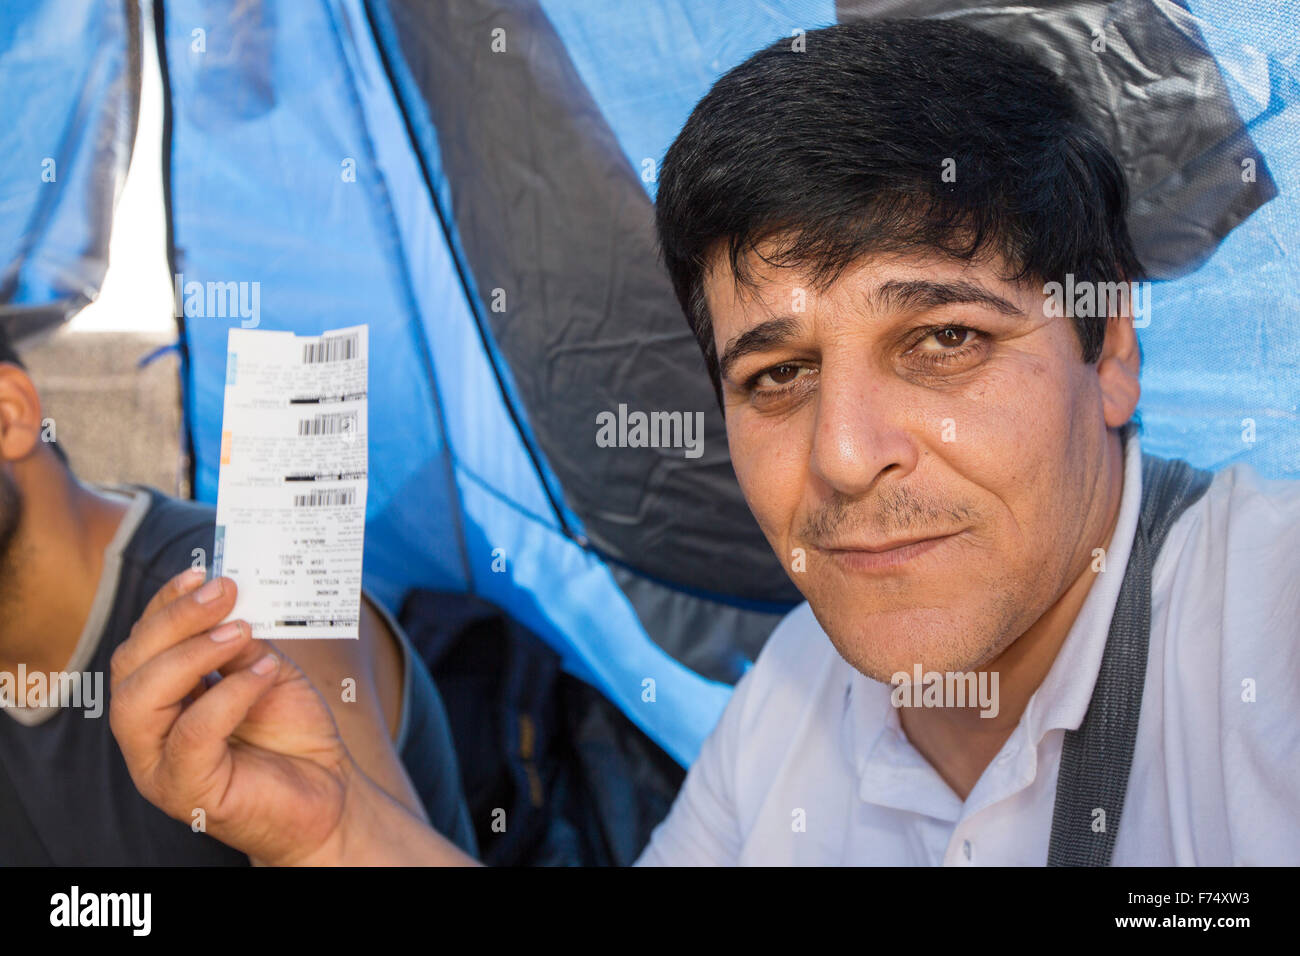 Syrian migrants fleeing the war and escaping to Europe,  who have landed on the Greek island of Lesvos on the north coast at Efthalou, here holding up ferry tickets that will allow them off the island to the Greek mainland. Up to 4,000 migrants a day are landing on the island and overwhelming the authorities. They are traficked by illegal Turkish people traffickers who charge up to $2,000 per person for a half hour ride in an overcrowded inflateable boat from the Turkish mainland to Lesvos. Stock Photo